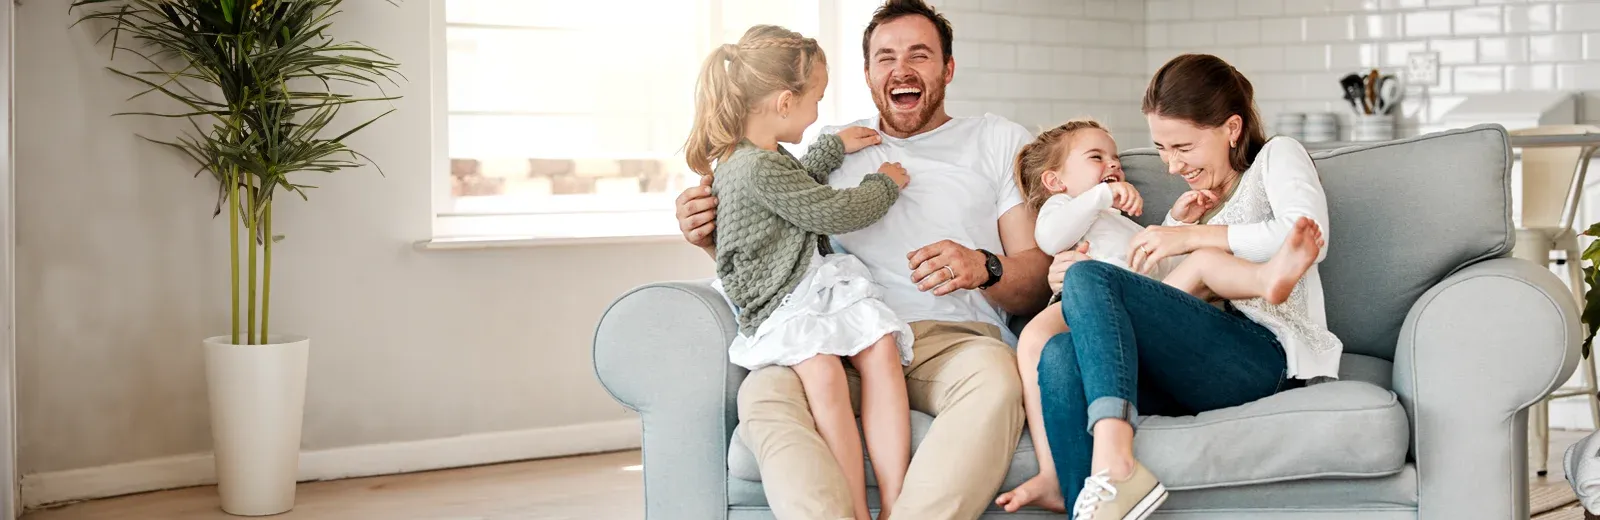 family laughing and having fun in pest free home